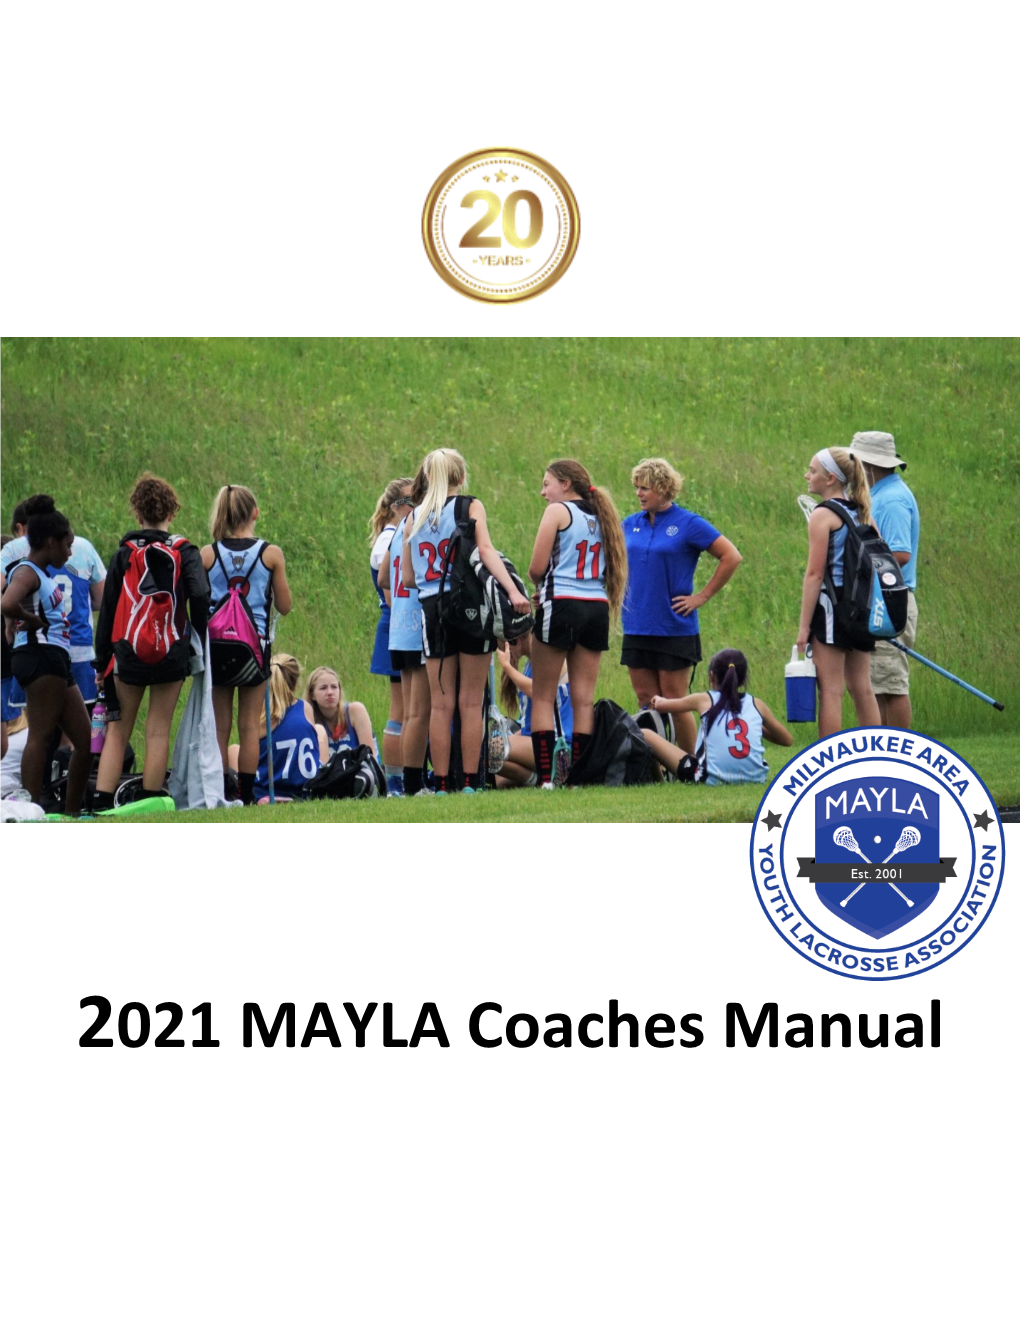 2021 MAYLA Coaches Manual Table of Contents